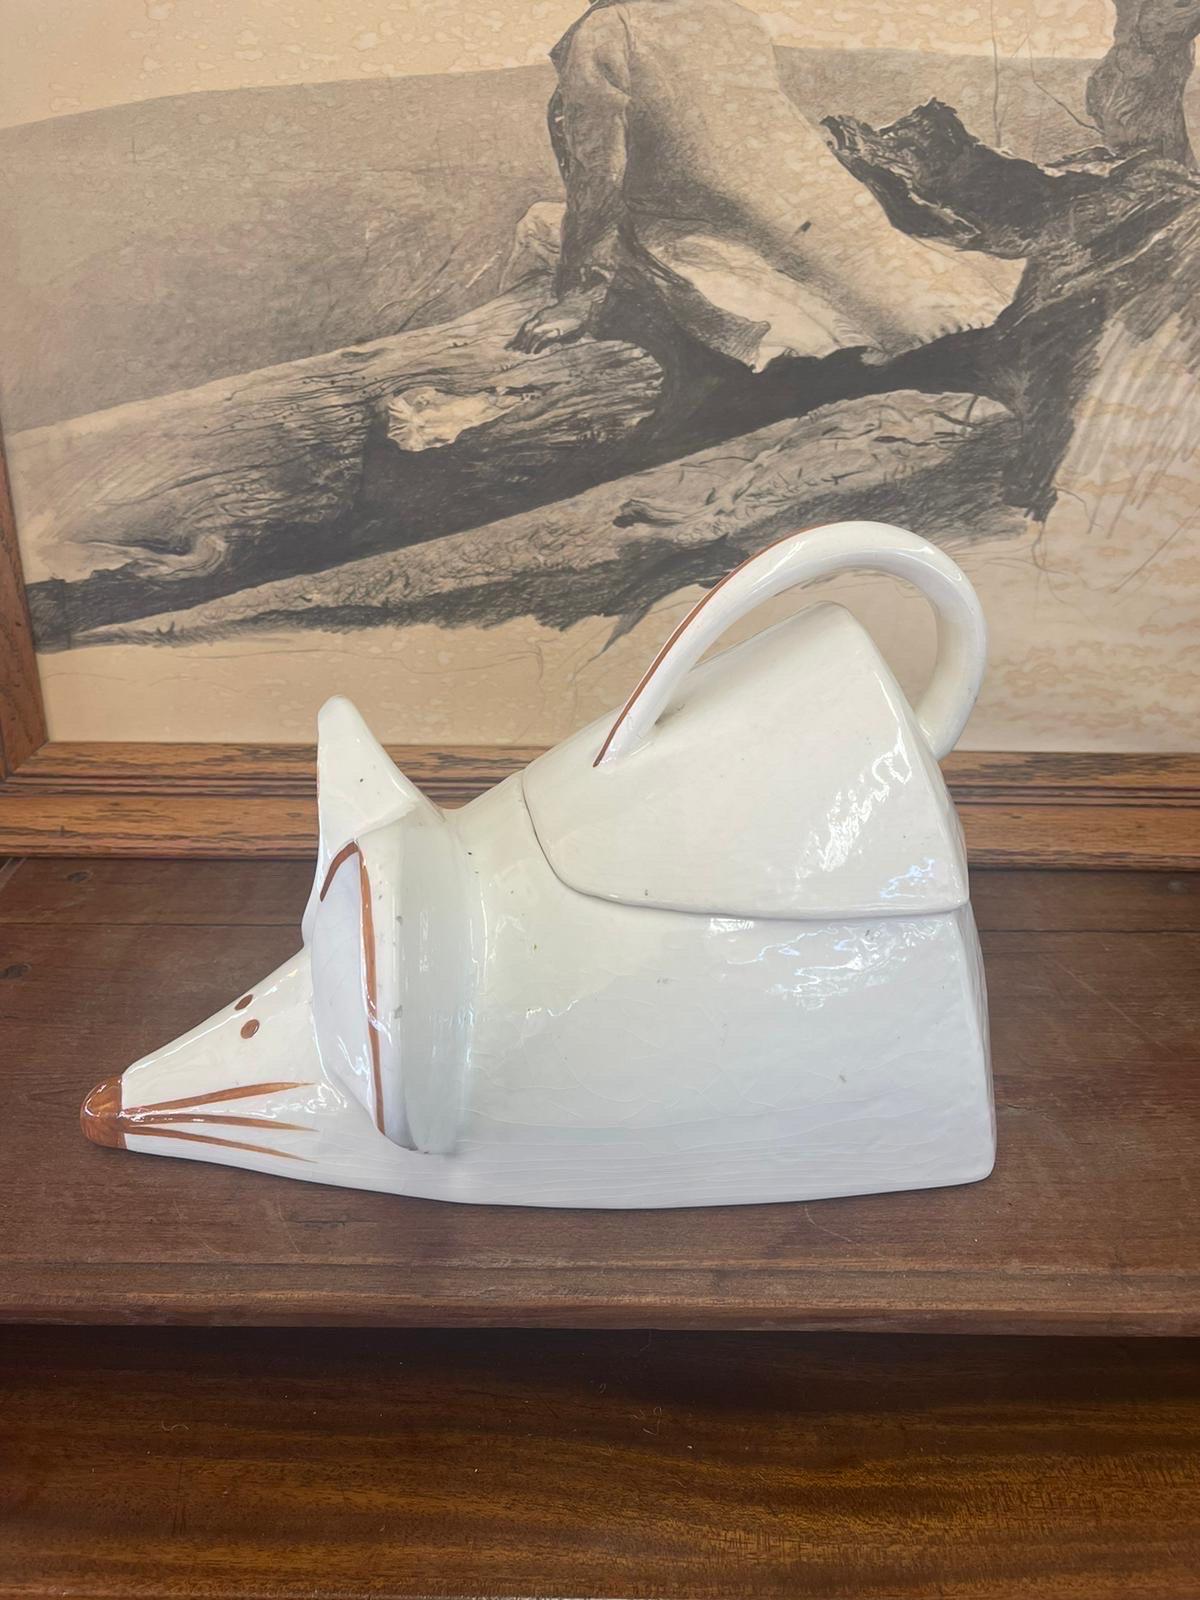 Vintage Hand Painted Cookie Jar. White Collaring with Brown Accents. Aged Ceramic Cracking. Vintage Condition Consistent with Age as Pictured.

Dimensions. 12 W ; 9 D ; 8 1/2 H